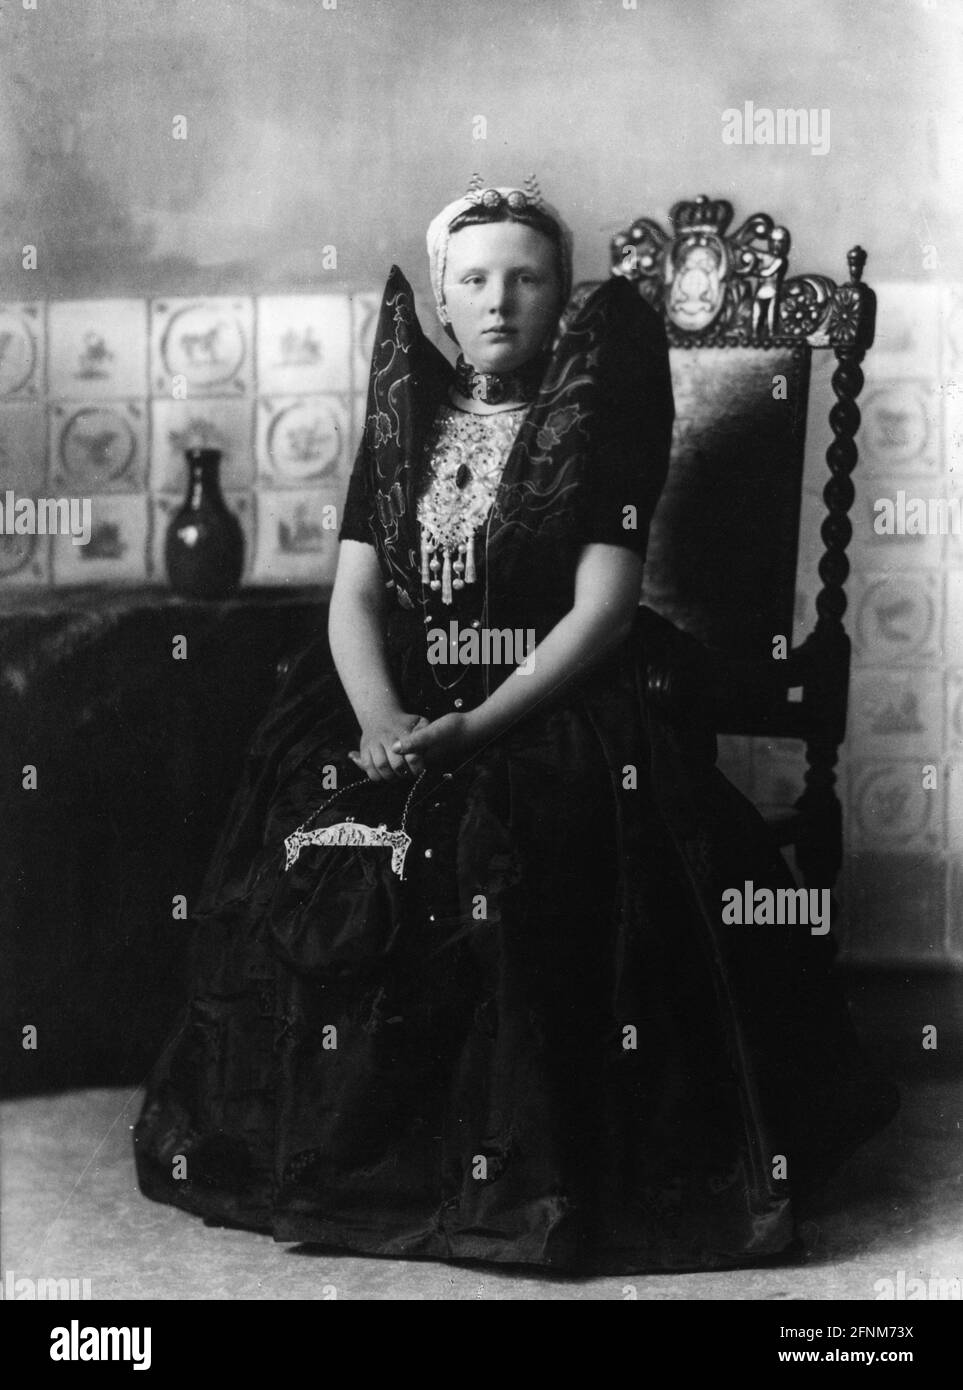 Juliana, 30.4.1909 - 20.3.2004, Queen of the Netherlands 4.9.1948 - 30.4.1980, full length in costume, ADDITIONAL-RIGHTS-CLEARANCE-INFO-NOT-AVAILABLE Stock Photo